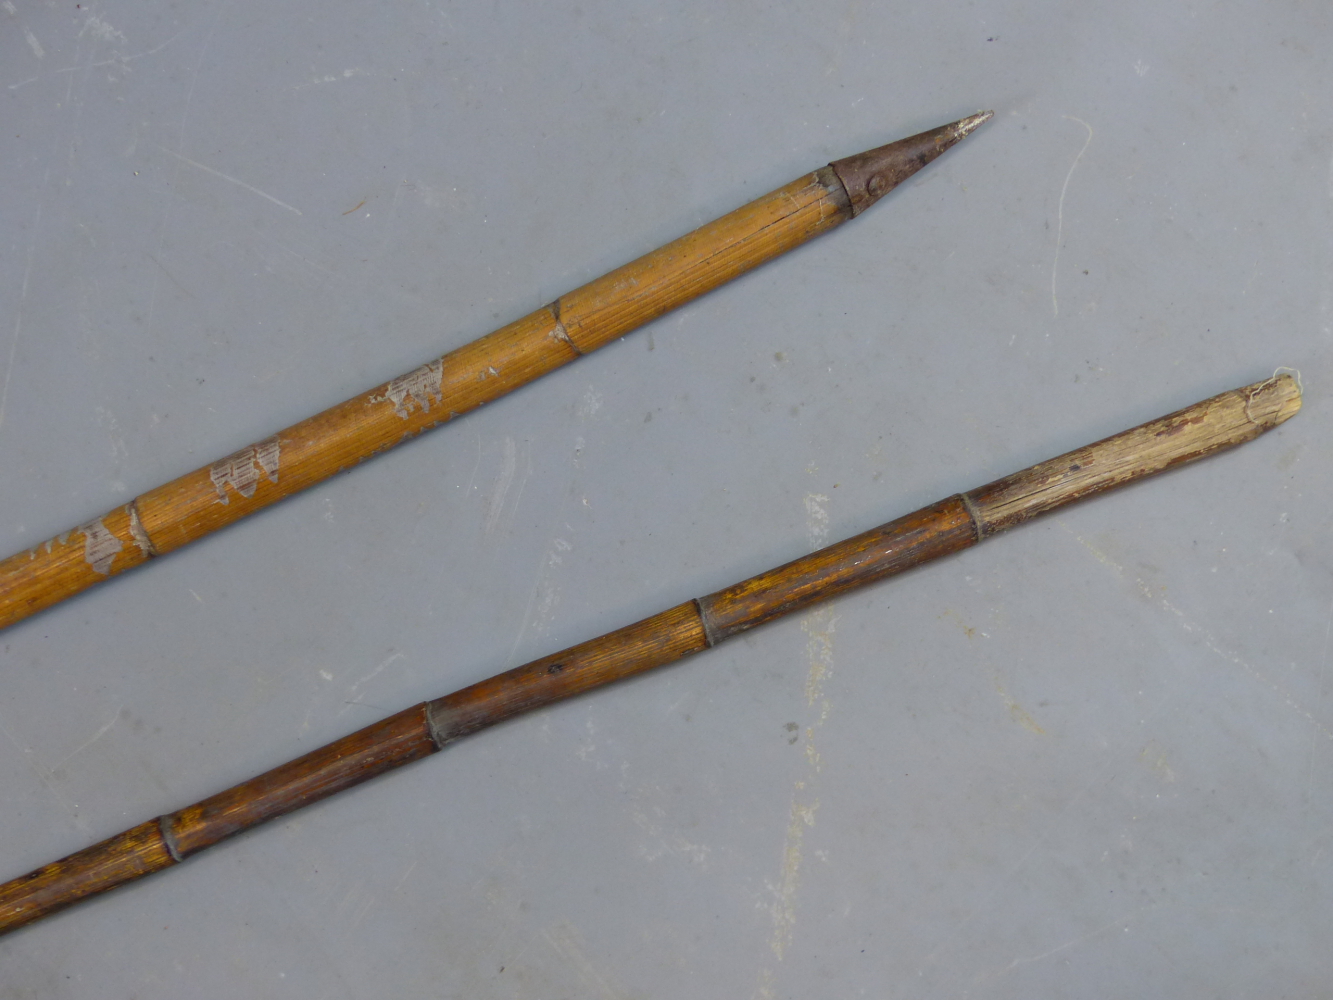 A BAMBOO SHAFTED IRON HEAD SPEAR WITH WOVEN BINDING, PROBABLY AFRICAN TOGETHER WITH A FURTHER BAMBOO - Image 3 of 4